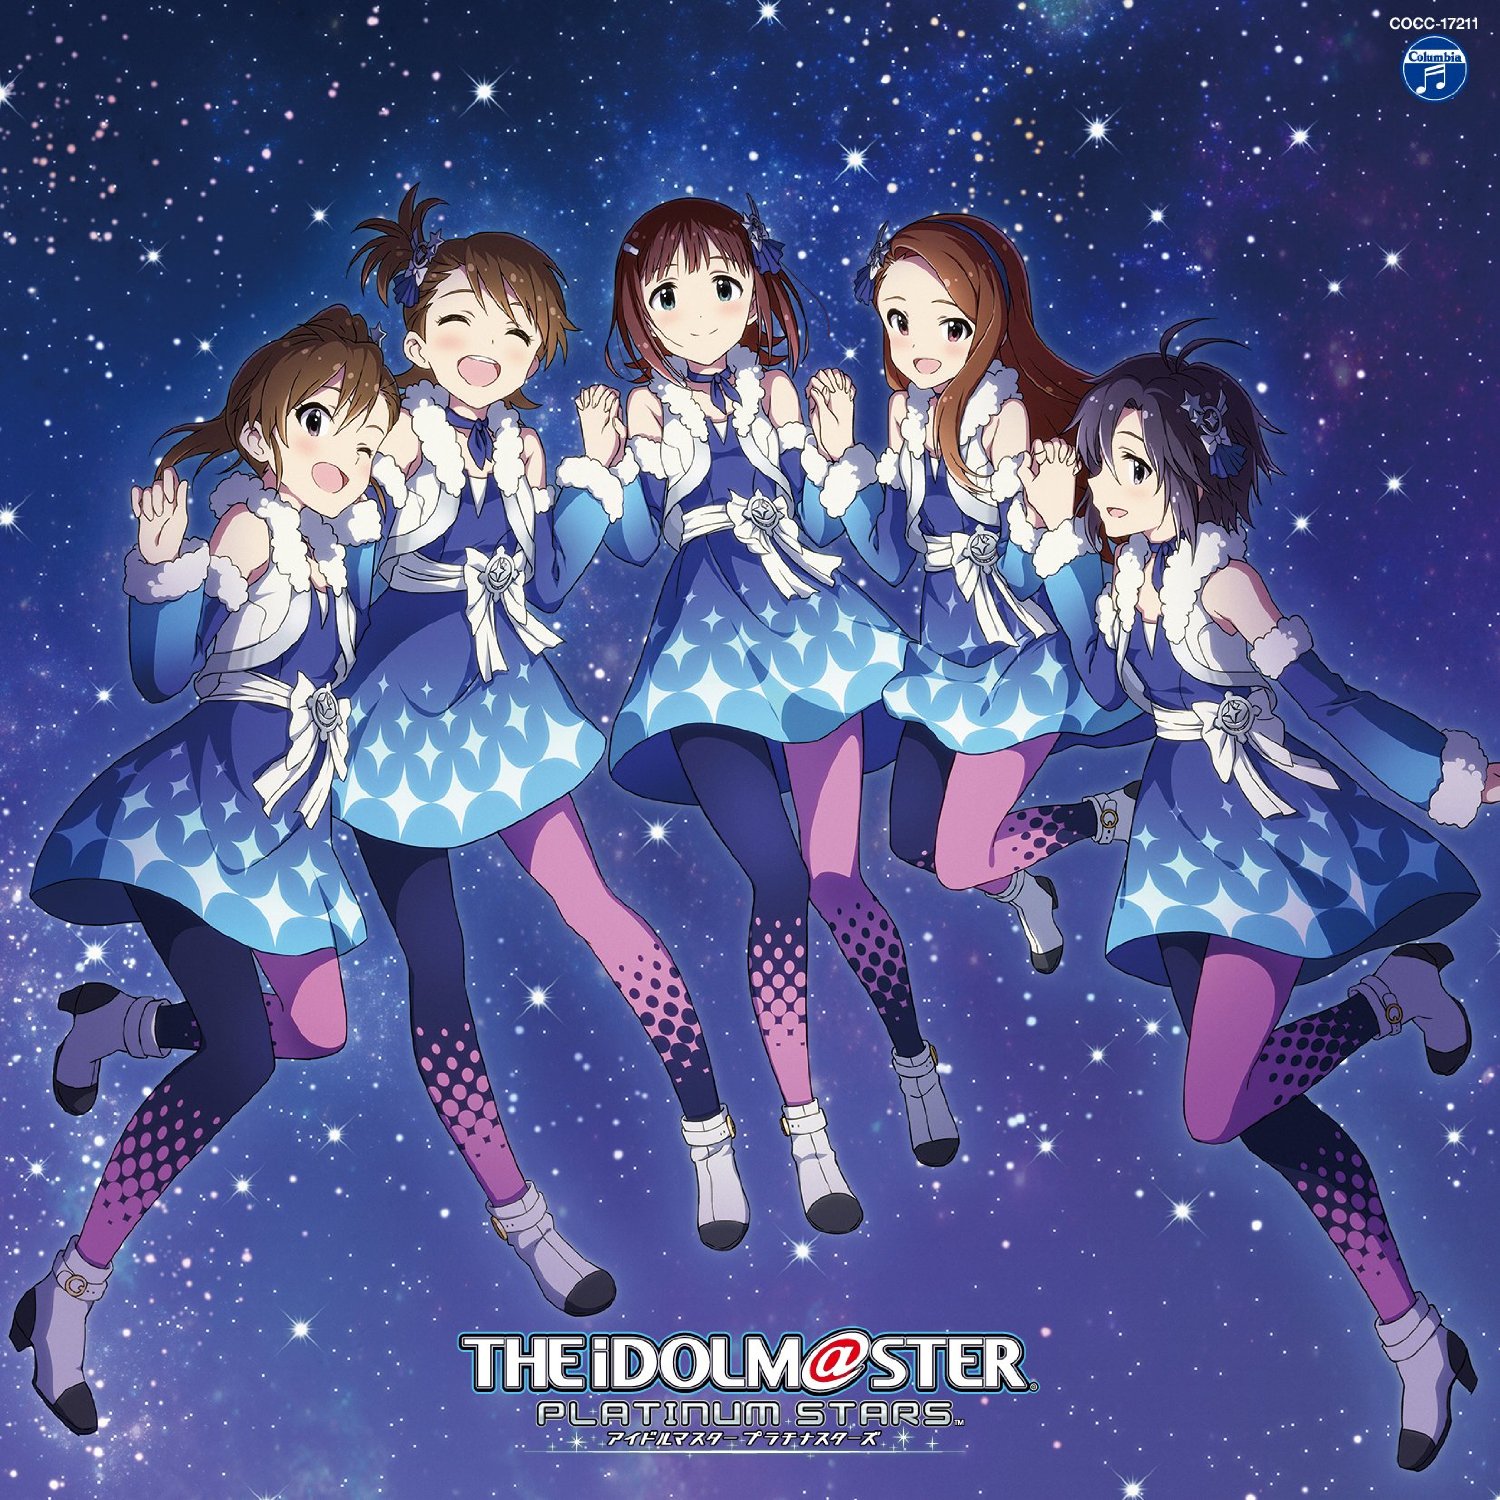 THE IDOLM@STER PLATINUM MASTER 01 Miracle Night COCC-17211.jpg